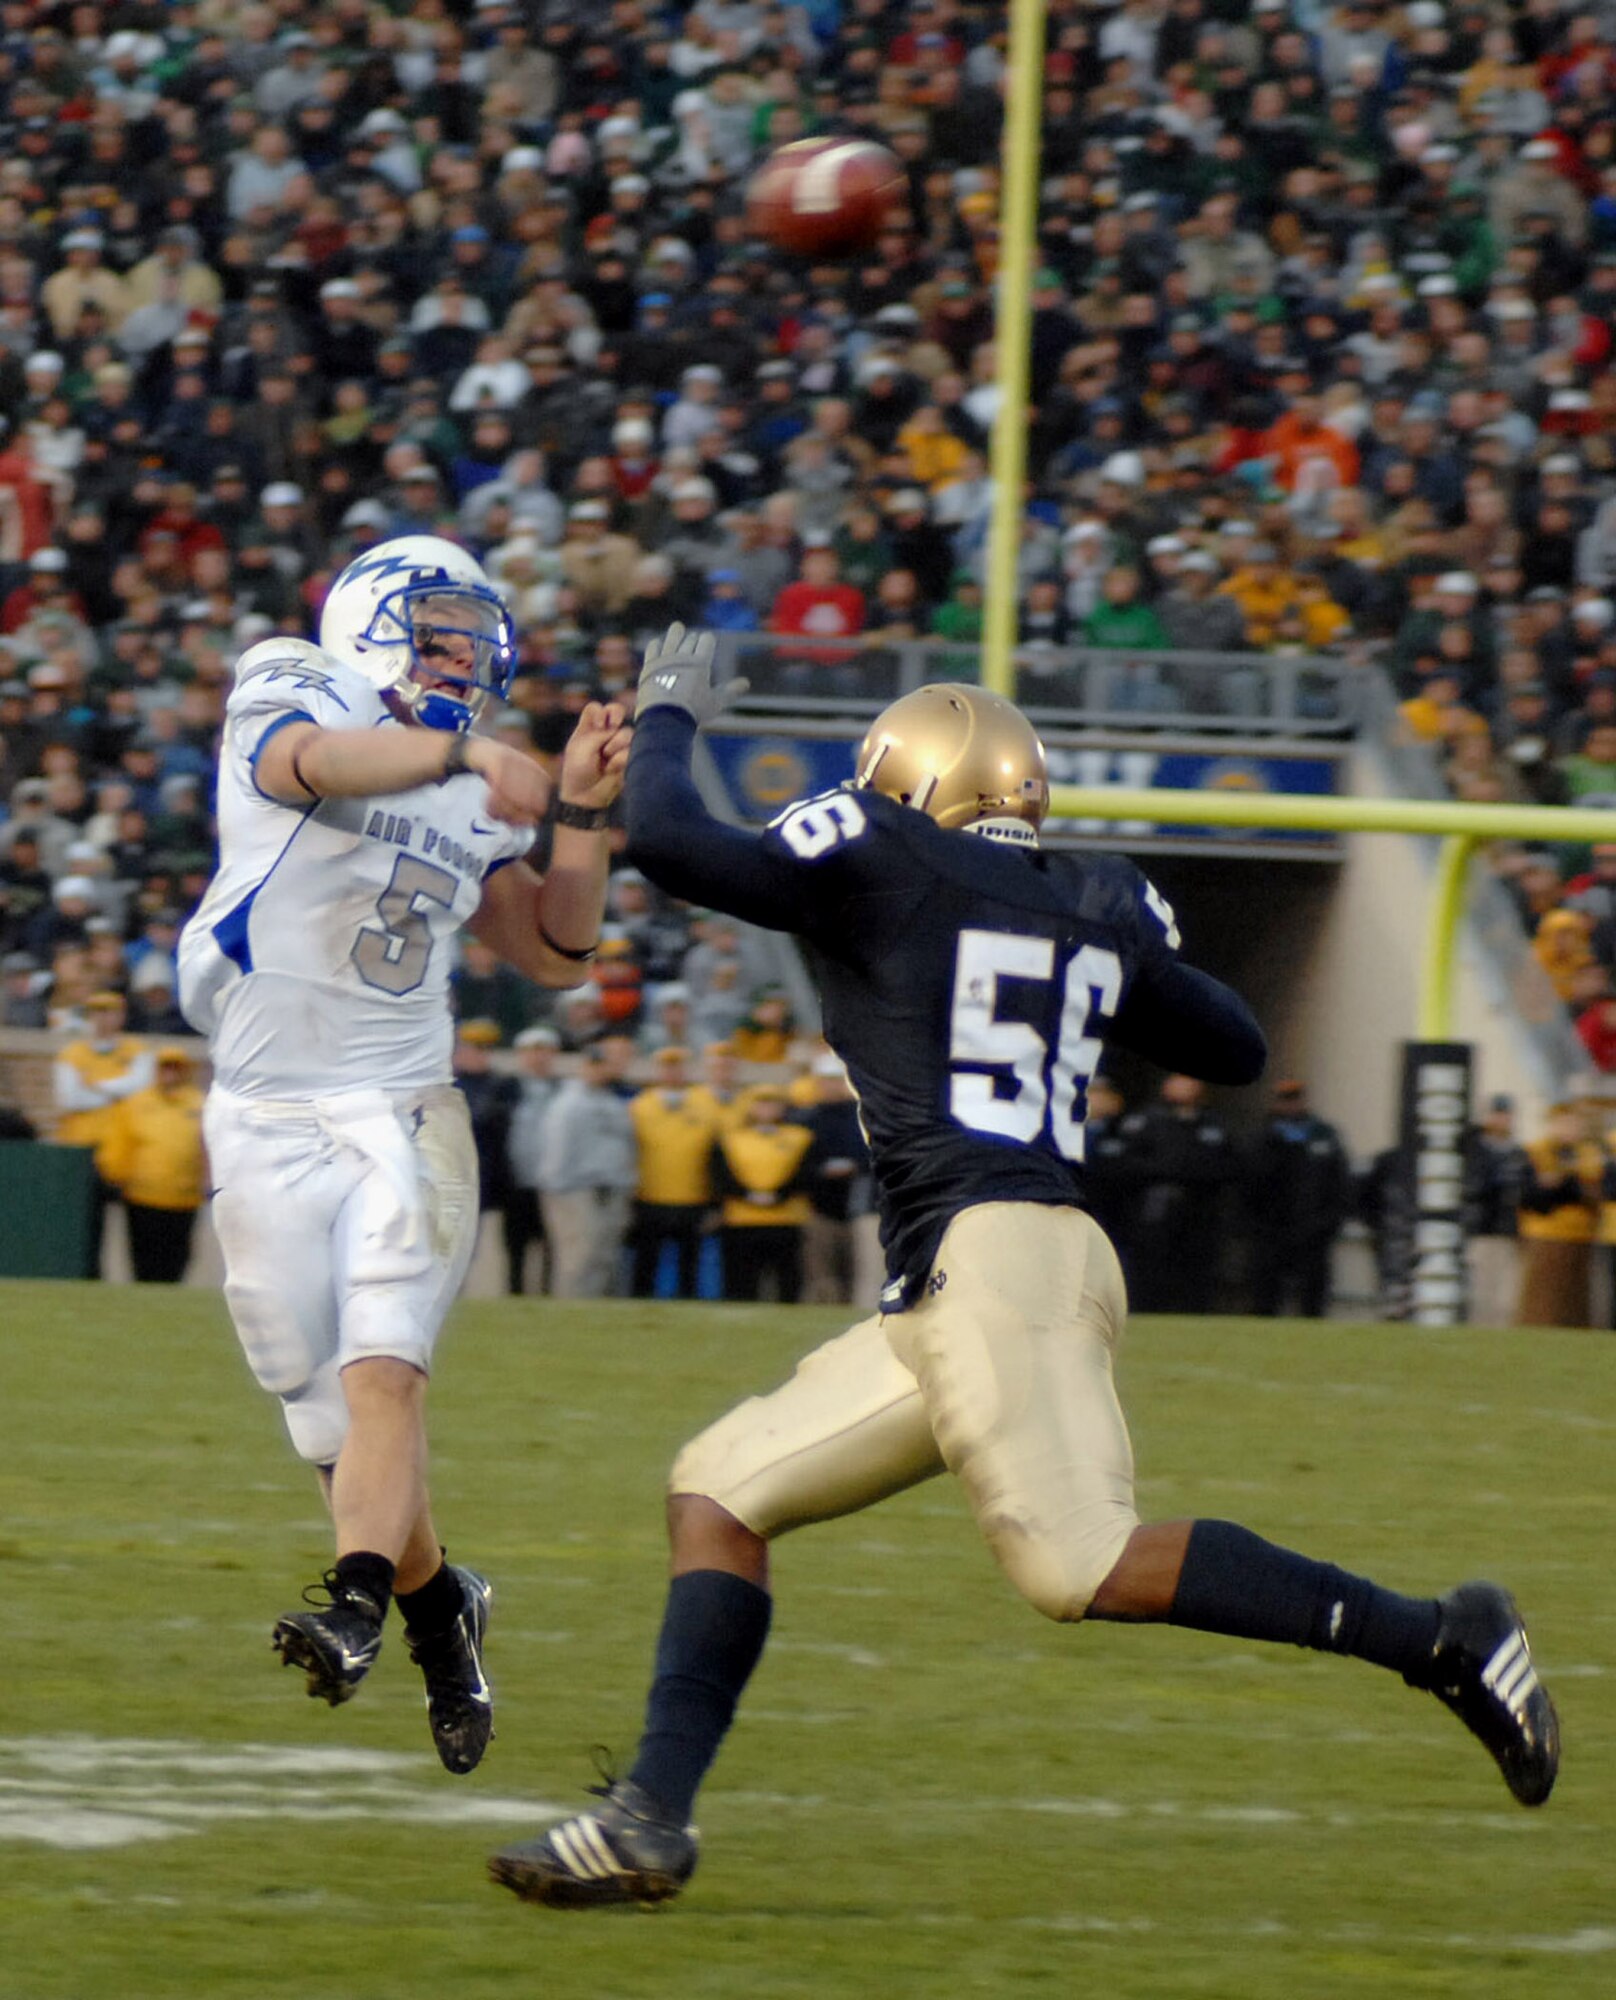 U.S. Air Force Academy Falcons quarterback Shaun Carney throws over Irish linebacker Kerry Neal during the Air Force Academy's 41-24 win over Notre Dame Nov. 10 at Notre Dame Stadium in Indiana. (Courtesy photo by Vanessa Gempis)
